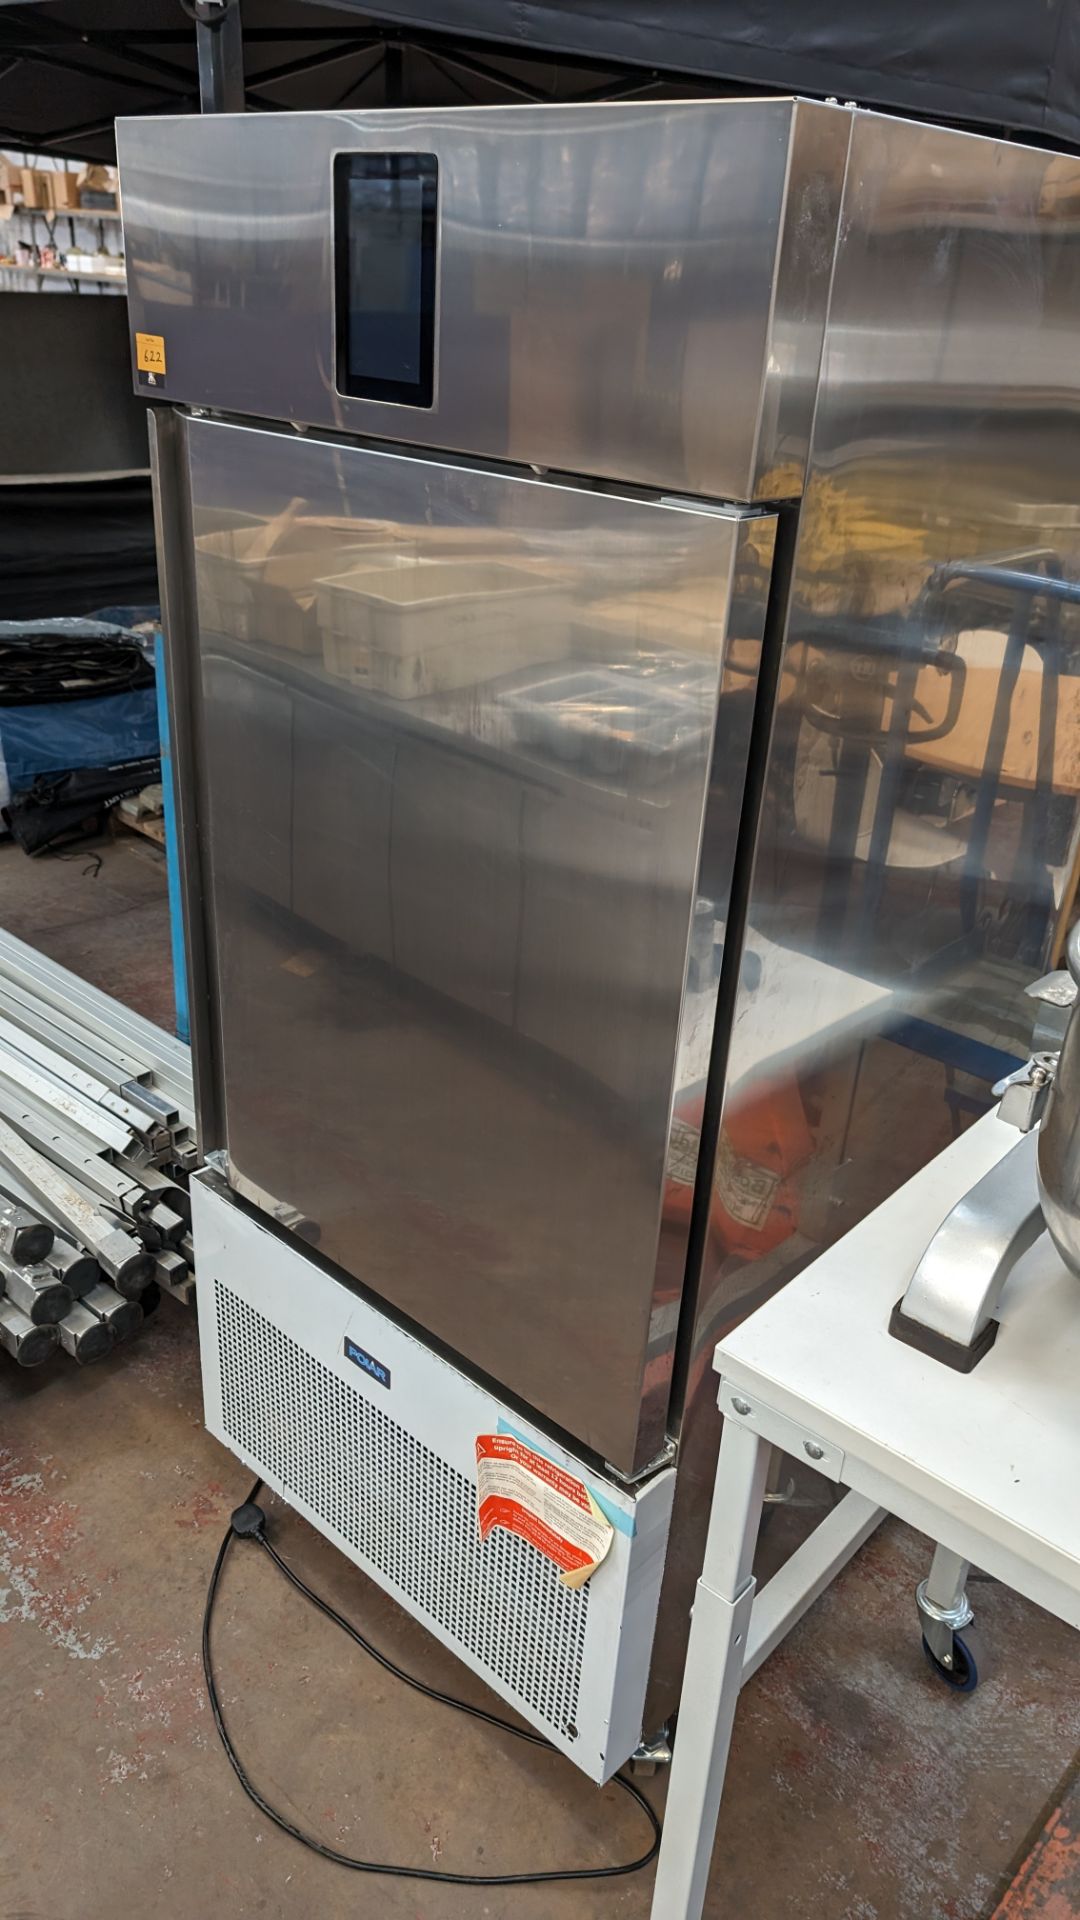 Polar Refrigeration mobile stainless steel commercial blast chiller with touchscreen controls - Image 9 of 9